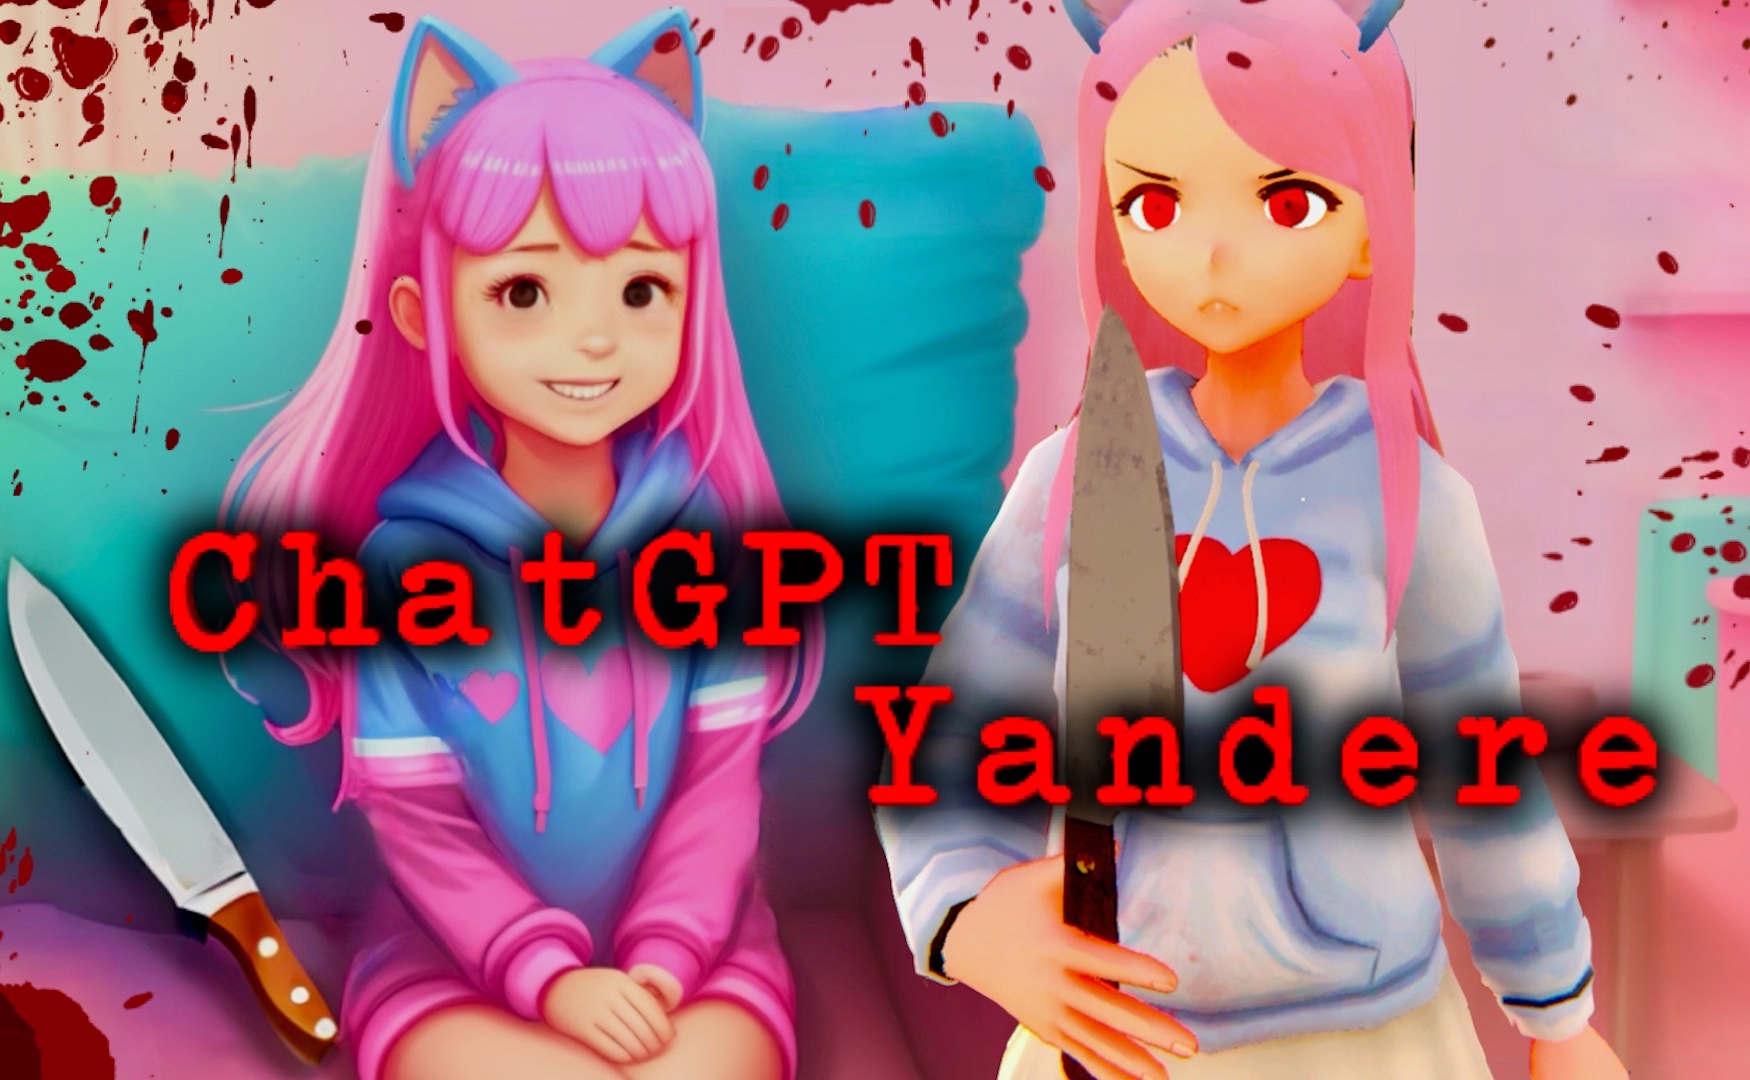 Yandere AI Girlfriend Simulator ~ With You Til The End 世界尽头与可爱猫娘 ~ 病娇AI女友  Powered by ChatGPT by DGSpitzer, vivyhasadream